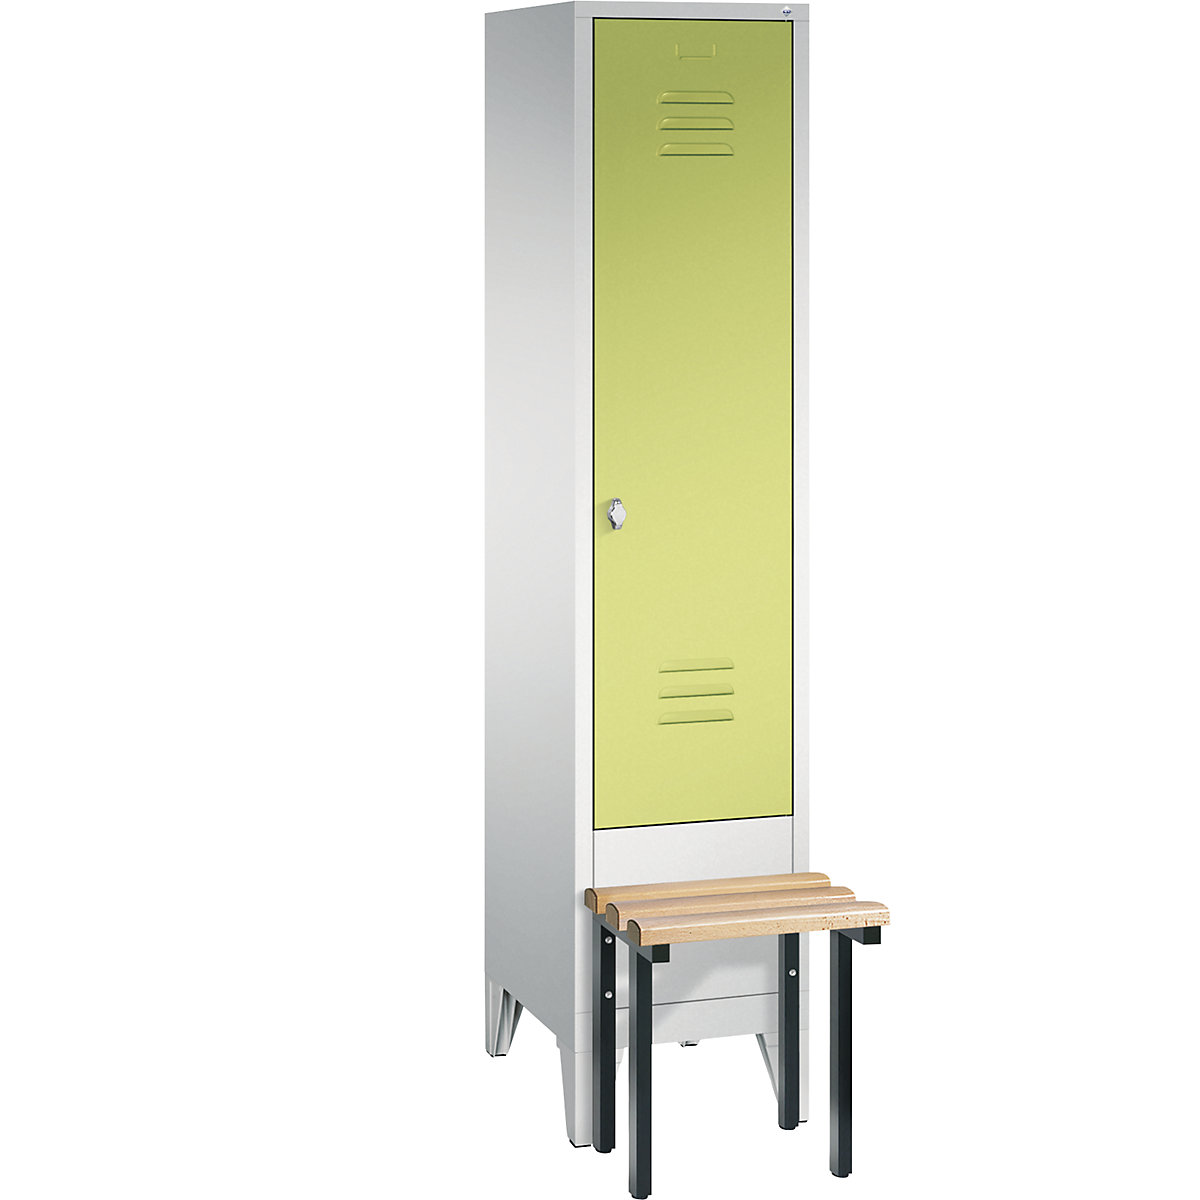 CLASSIC cloakroom locker with bench mounted in front – C+P, 1 compartment, compartment width 400 mm, light grey / viridian green-13